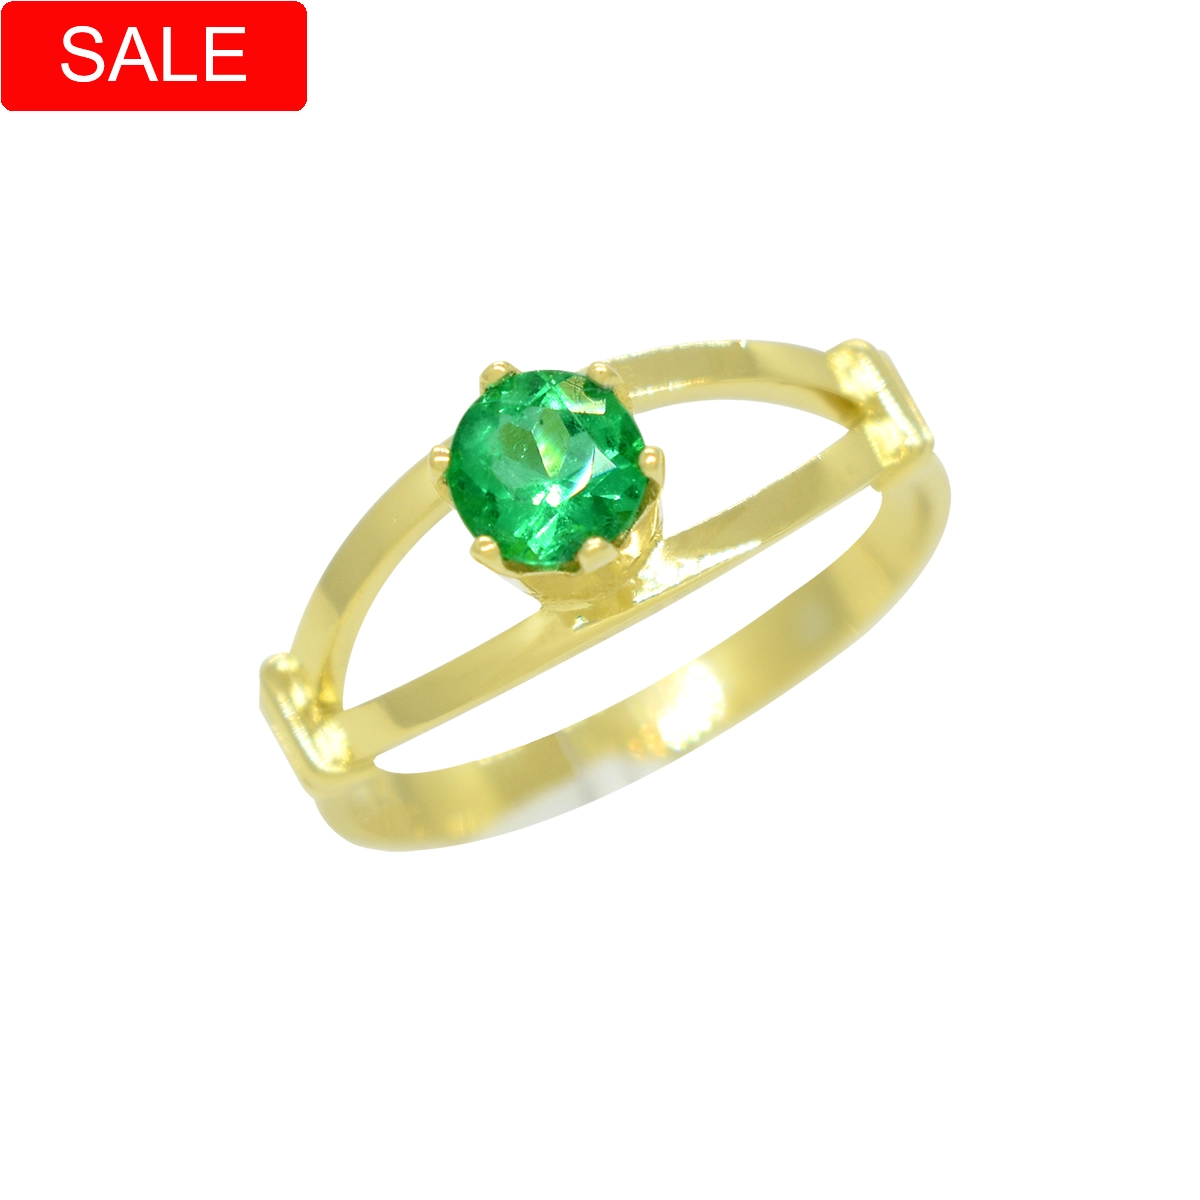 Soliatire emerald ring in 18K gold with 0.42 carats round-cut natural emerald from Colombia in a simple engagement ring design